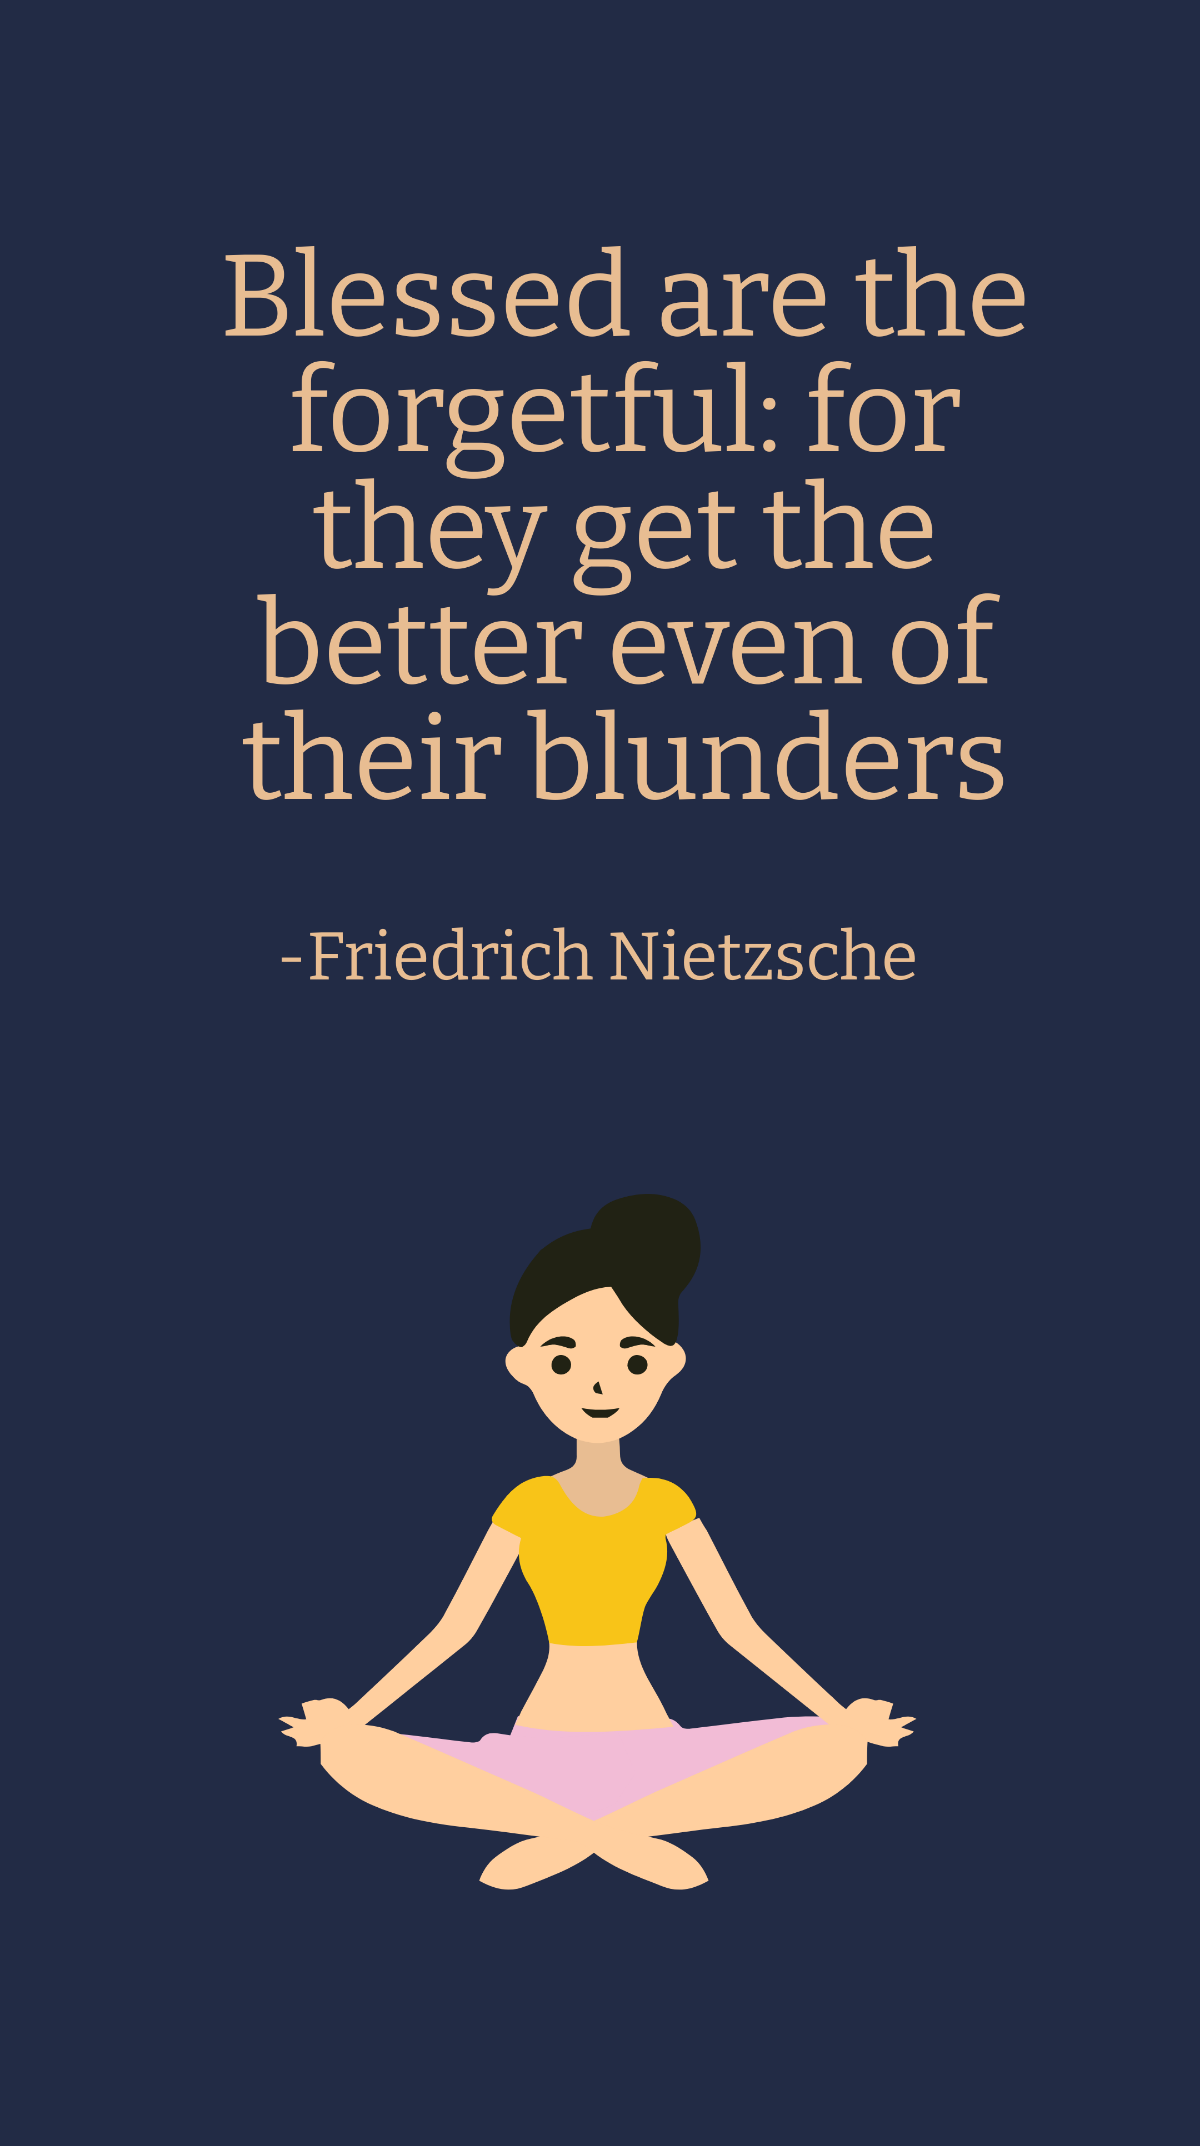 Friedrich Nietzsche - Blessed are the forgetful: for they get the better even of their blunders Template